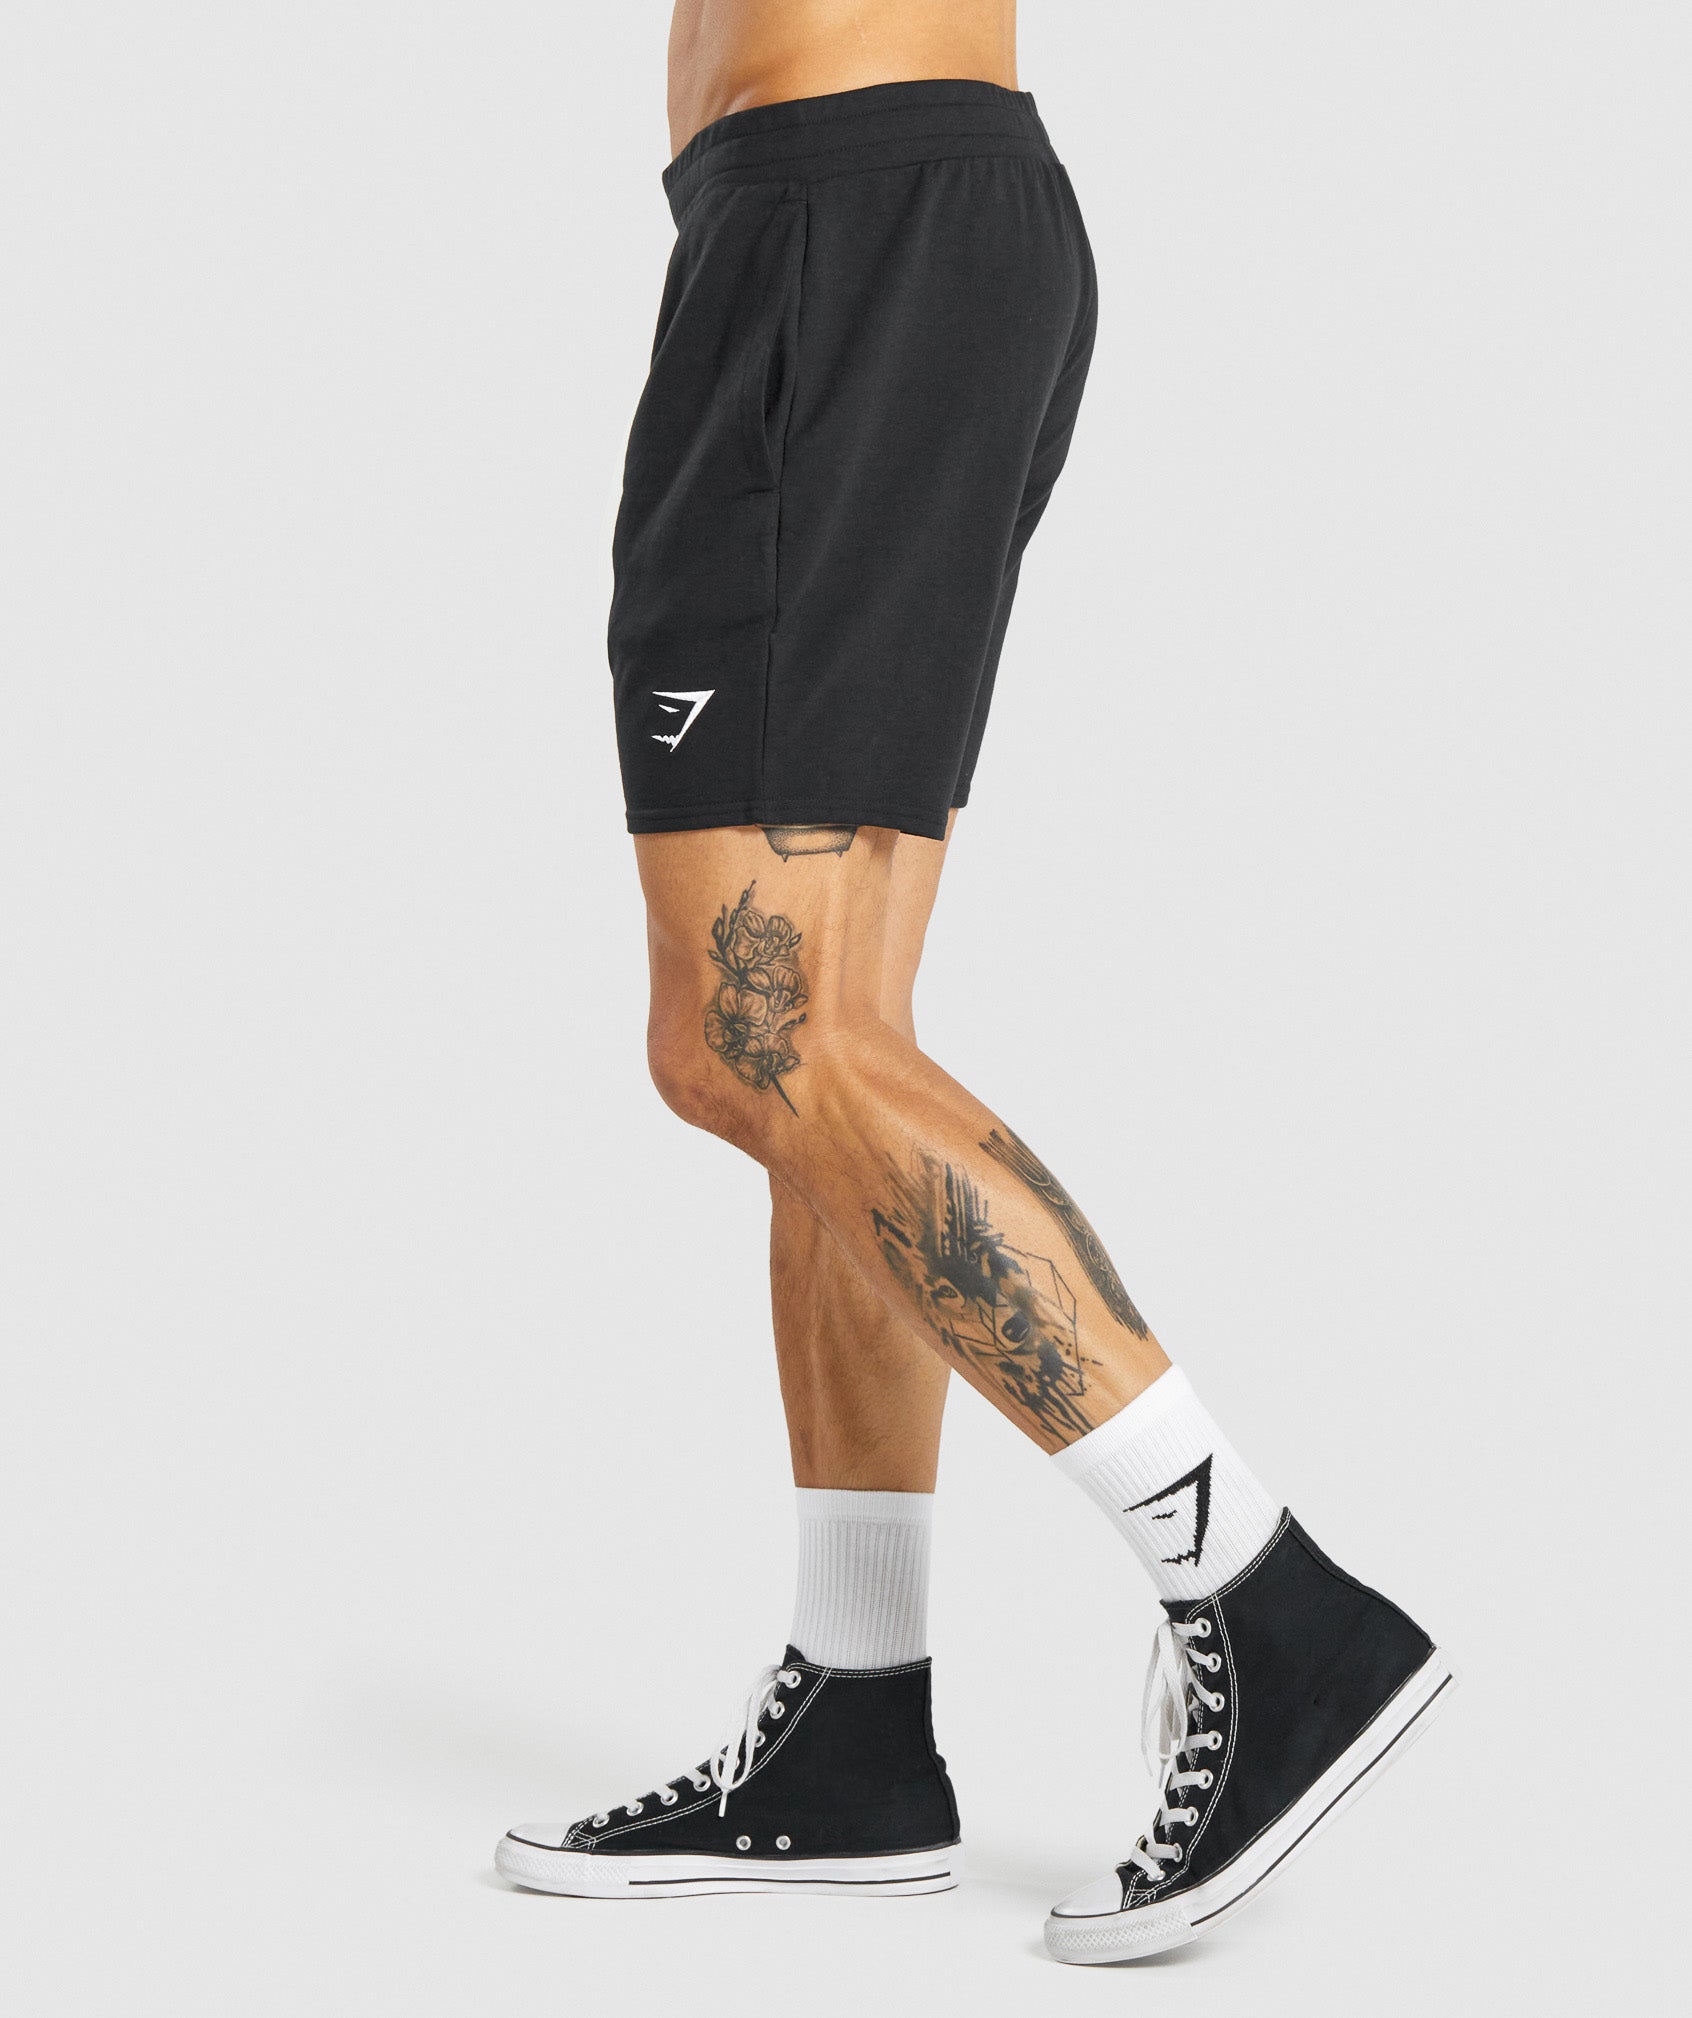 Essential 7" Shorts in Black - view 3